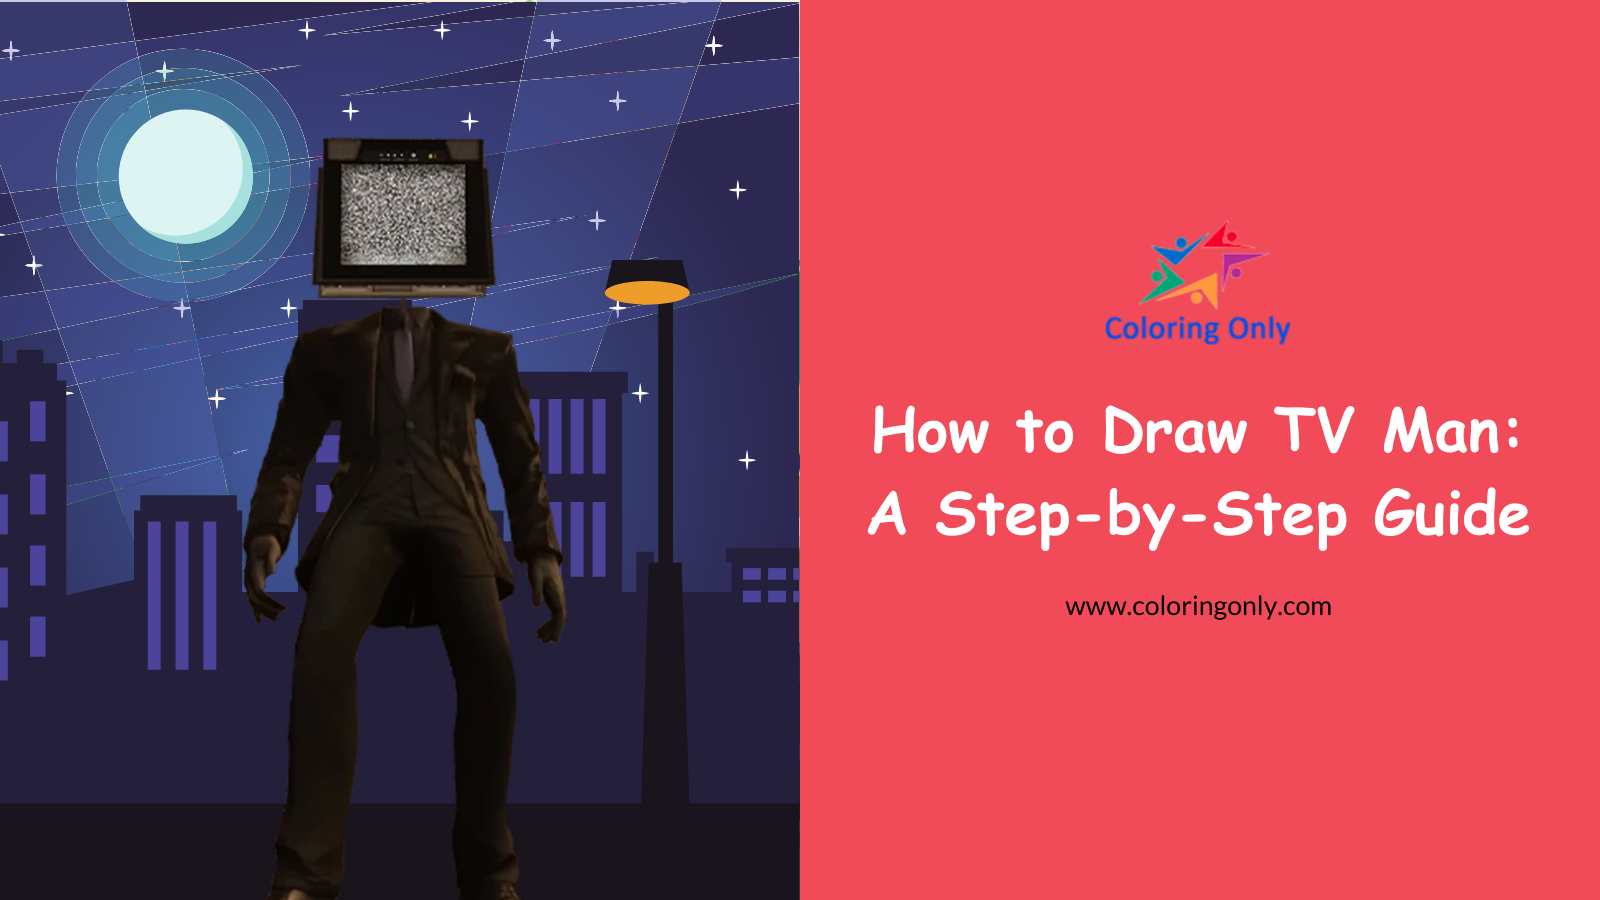 How to Draw TV Man: A Step-by-Step Guide